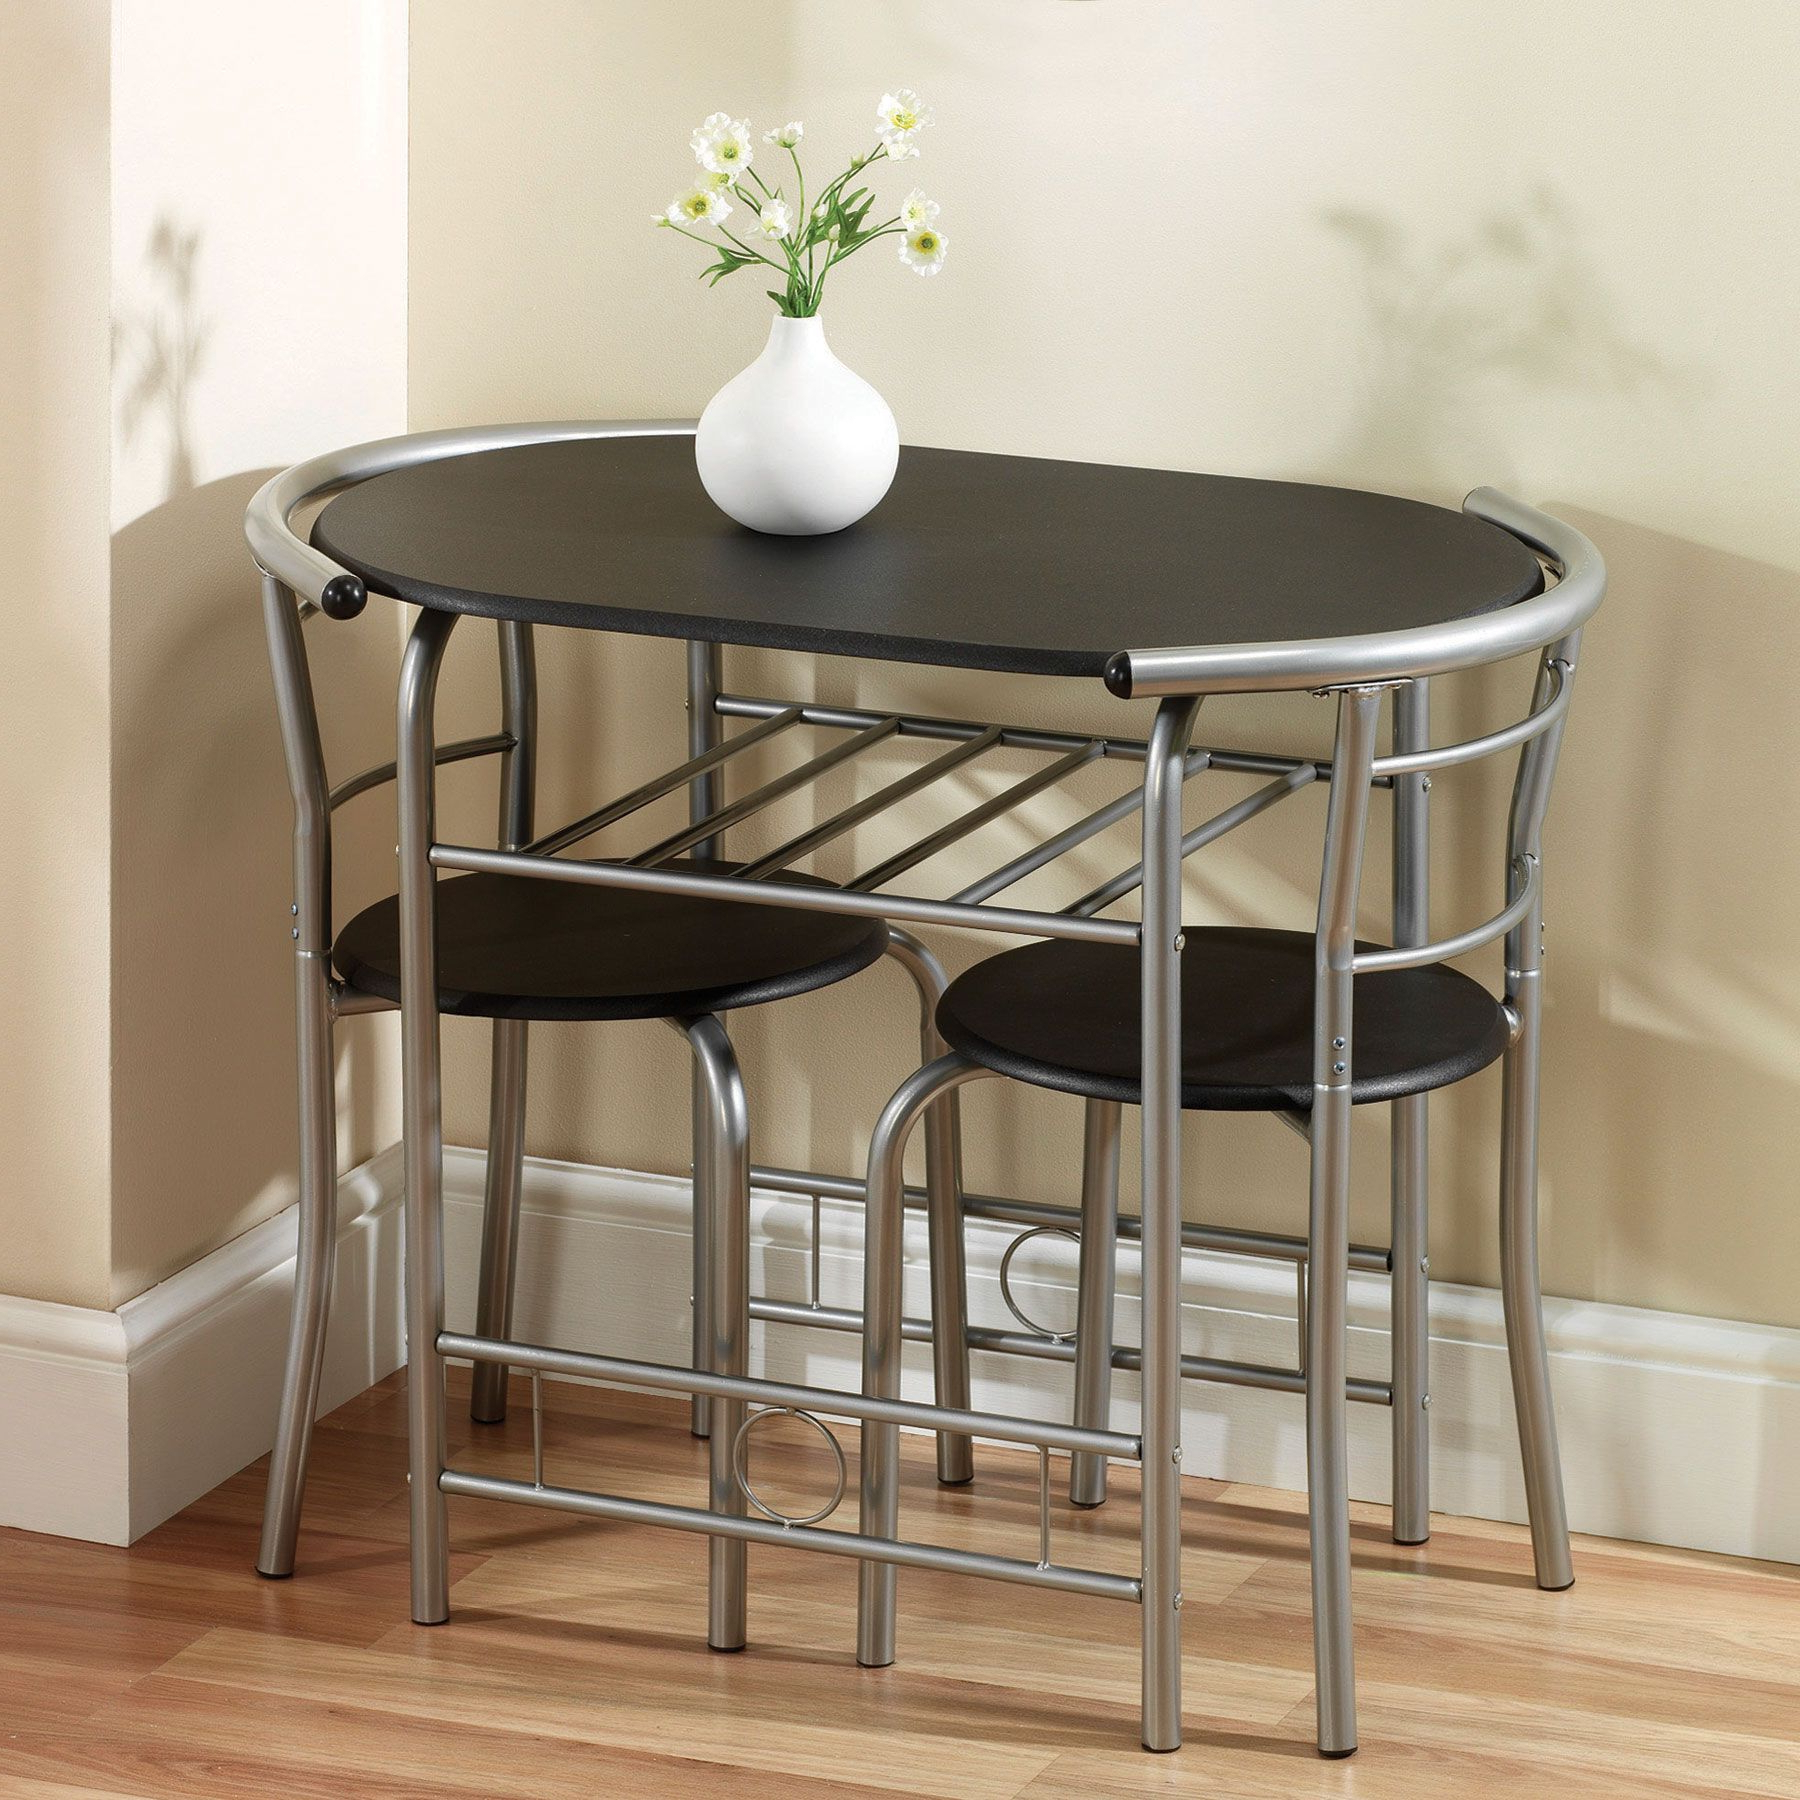 50 Amazing Space Saving Dining Table, Folding Dining Table And Chairs For Small Spaces